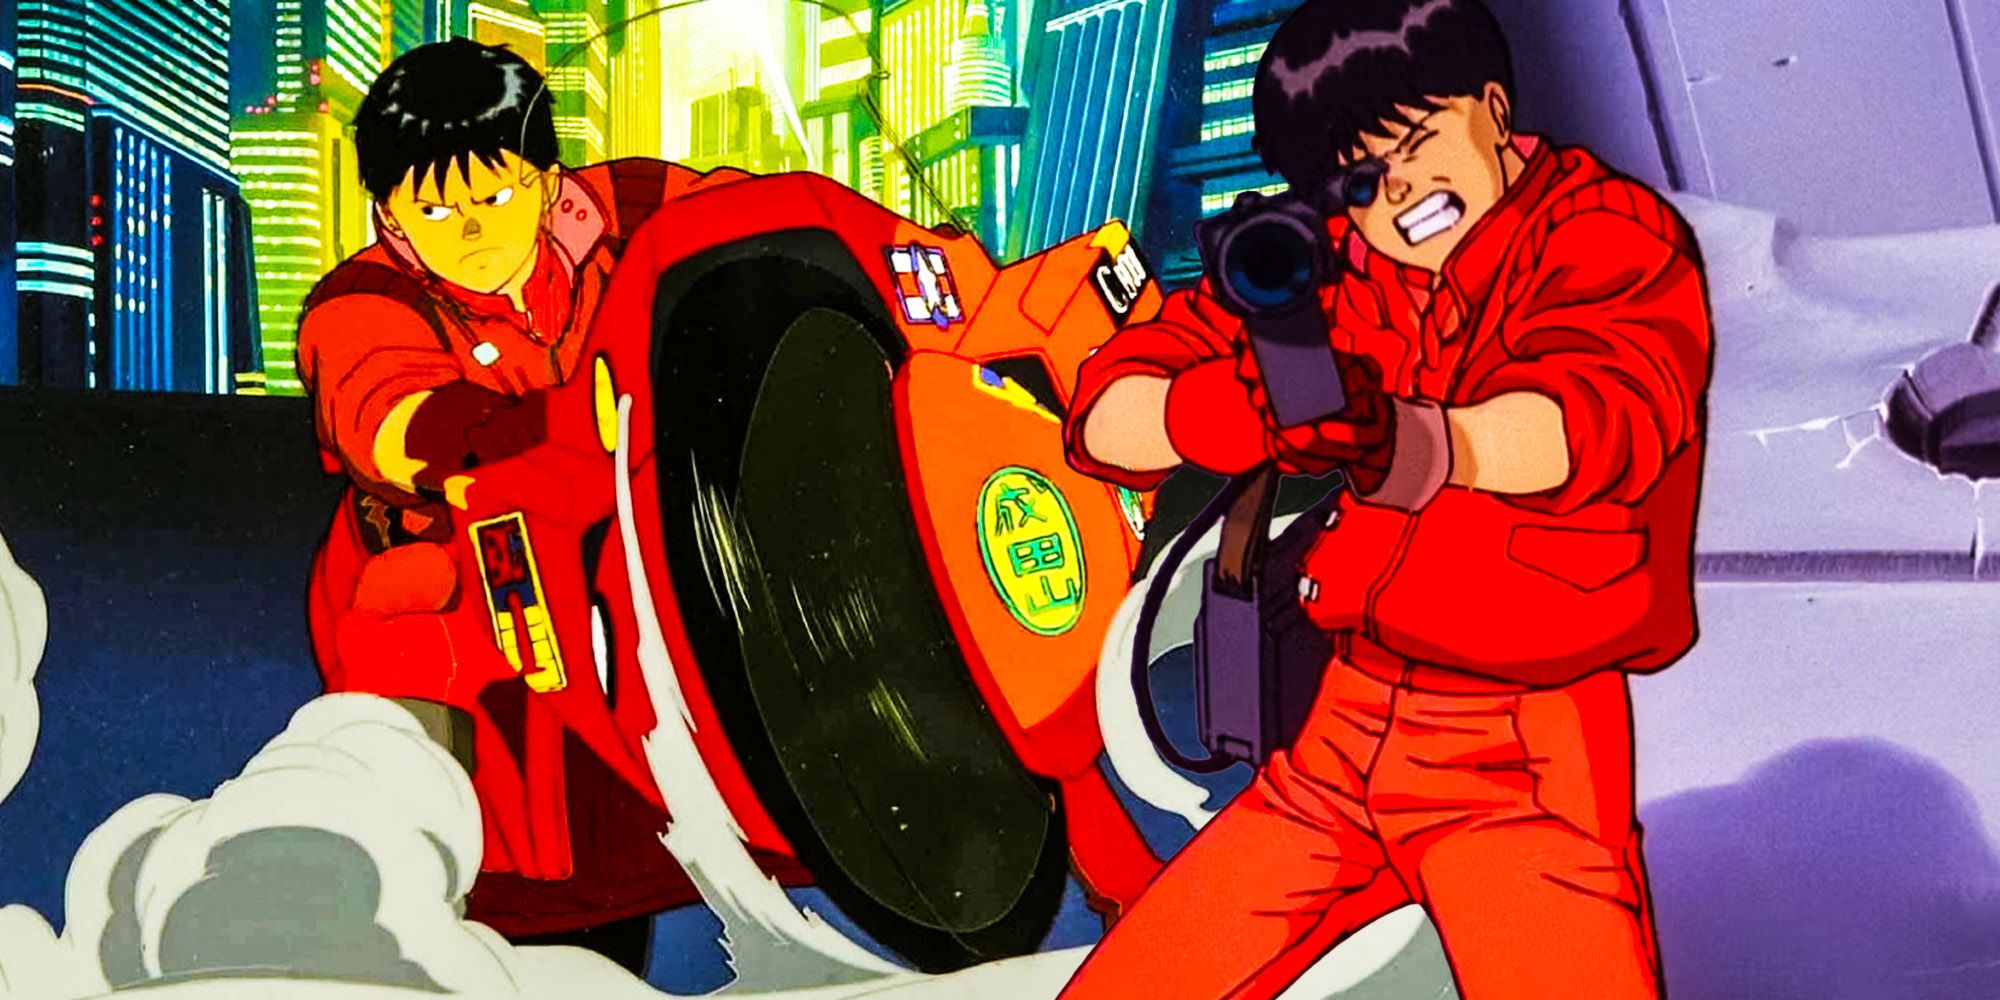 Anime Heroes That Should Get a Hollywood Live Action Origin Story